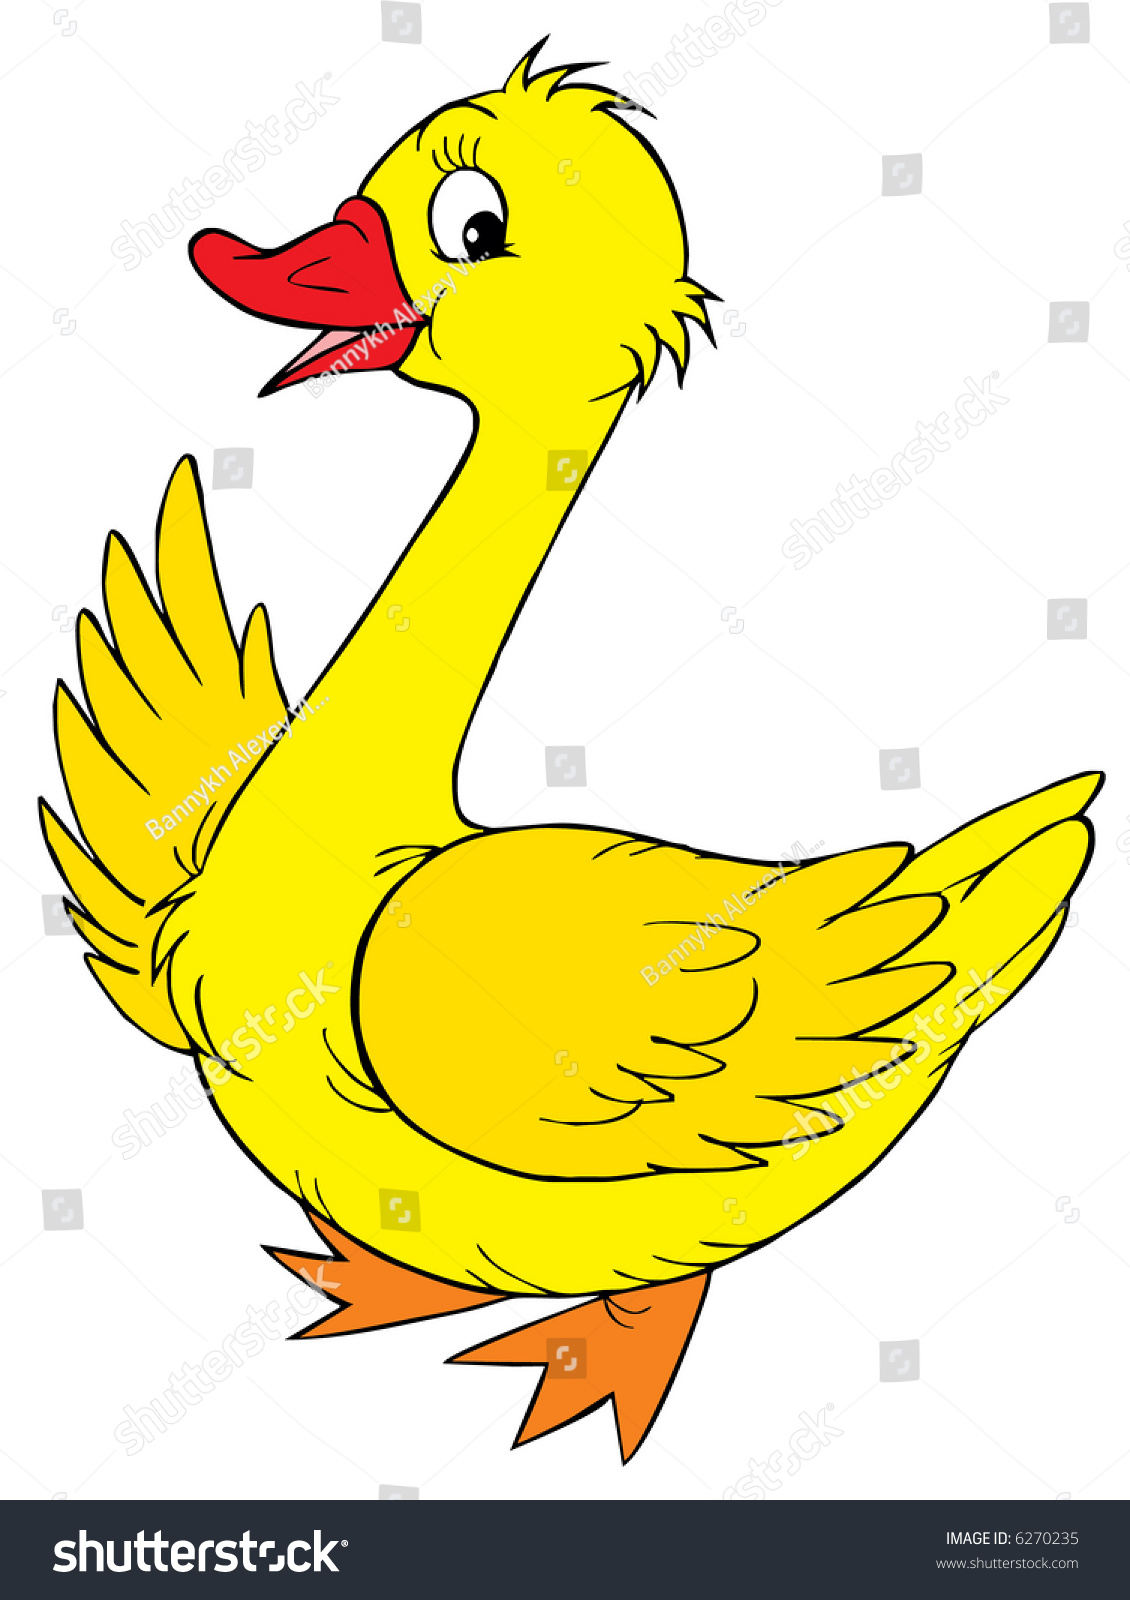 silly goose clipart - photo #45